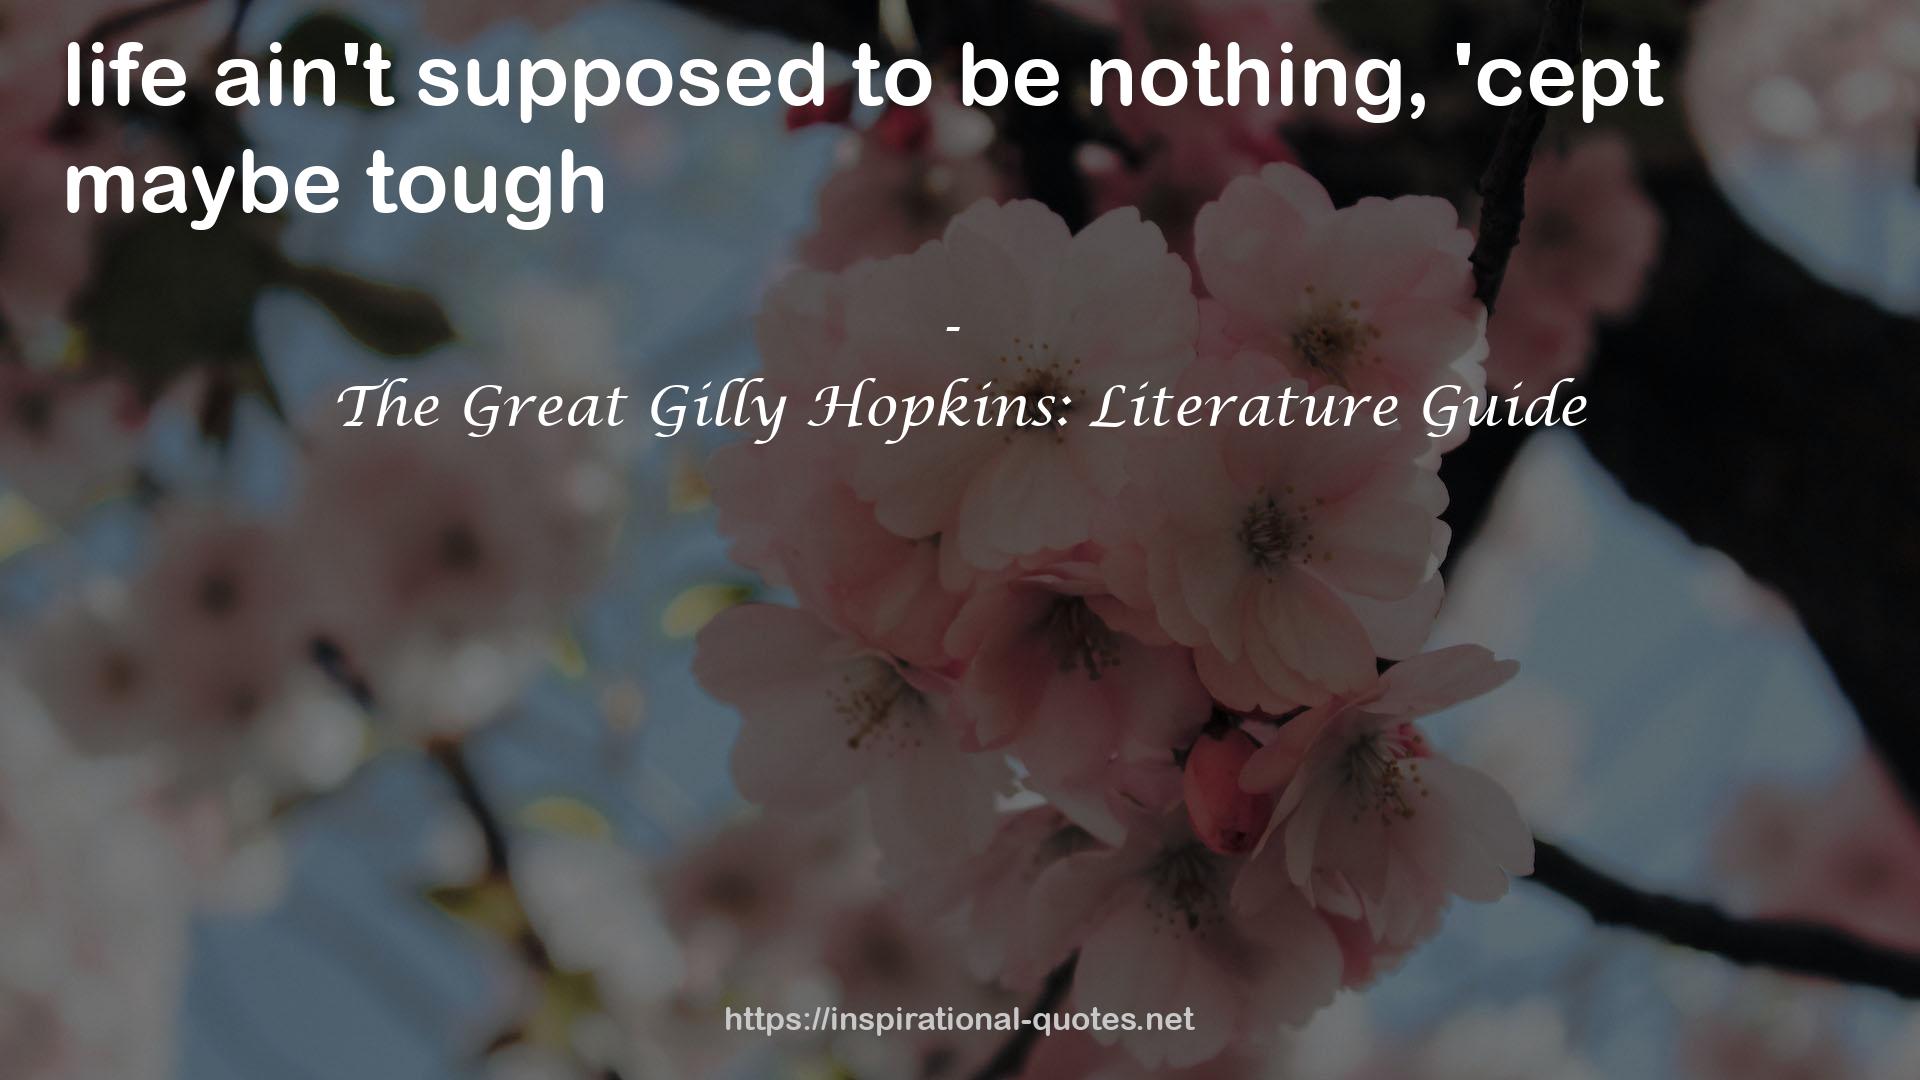 The Great Gilly Hopkins: Literature Guide QUOTES